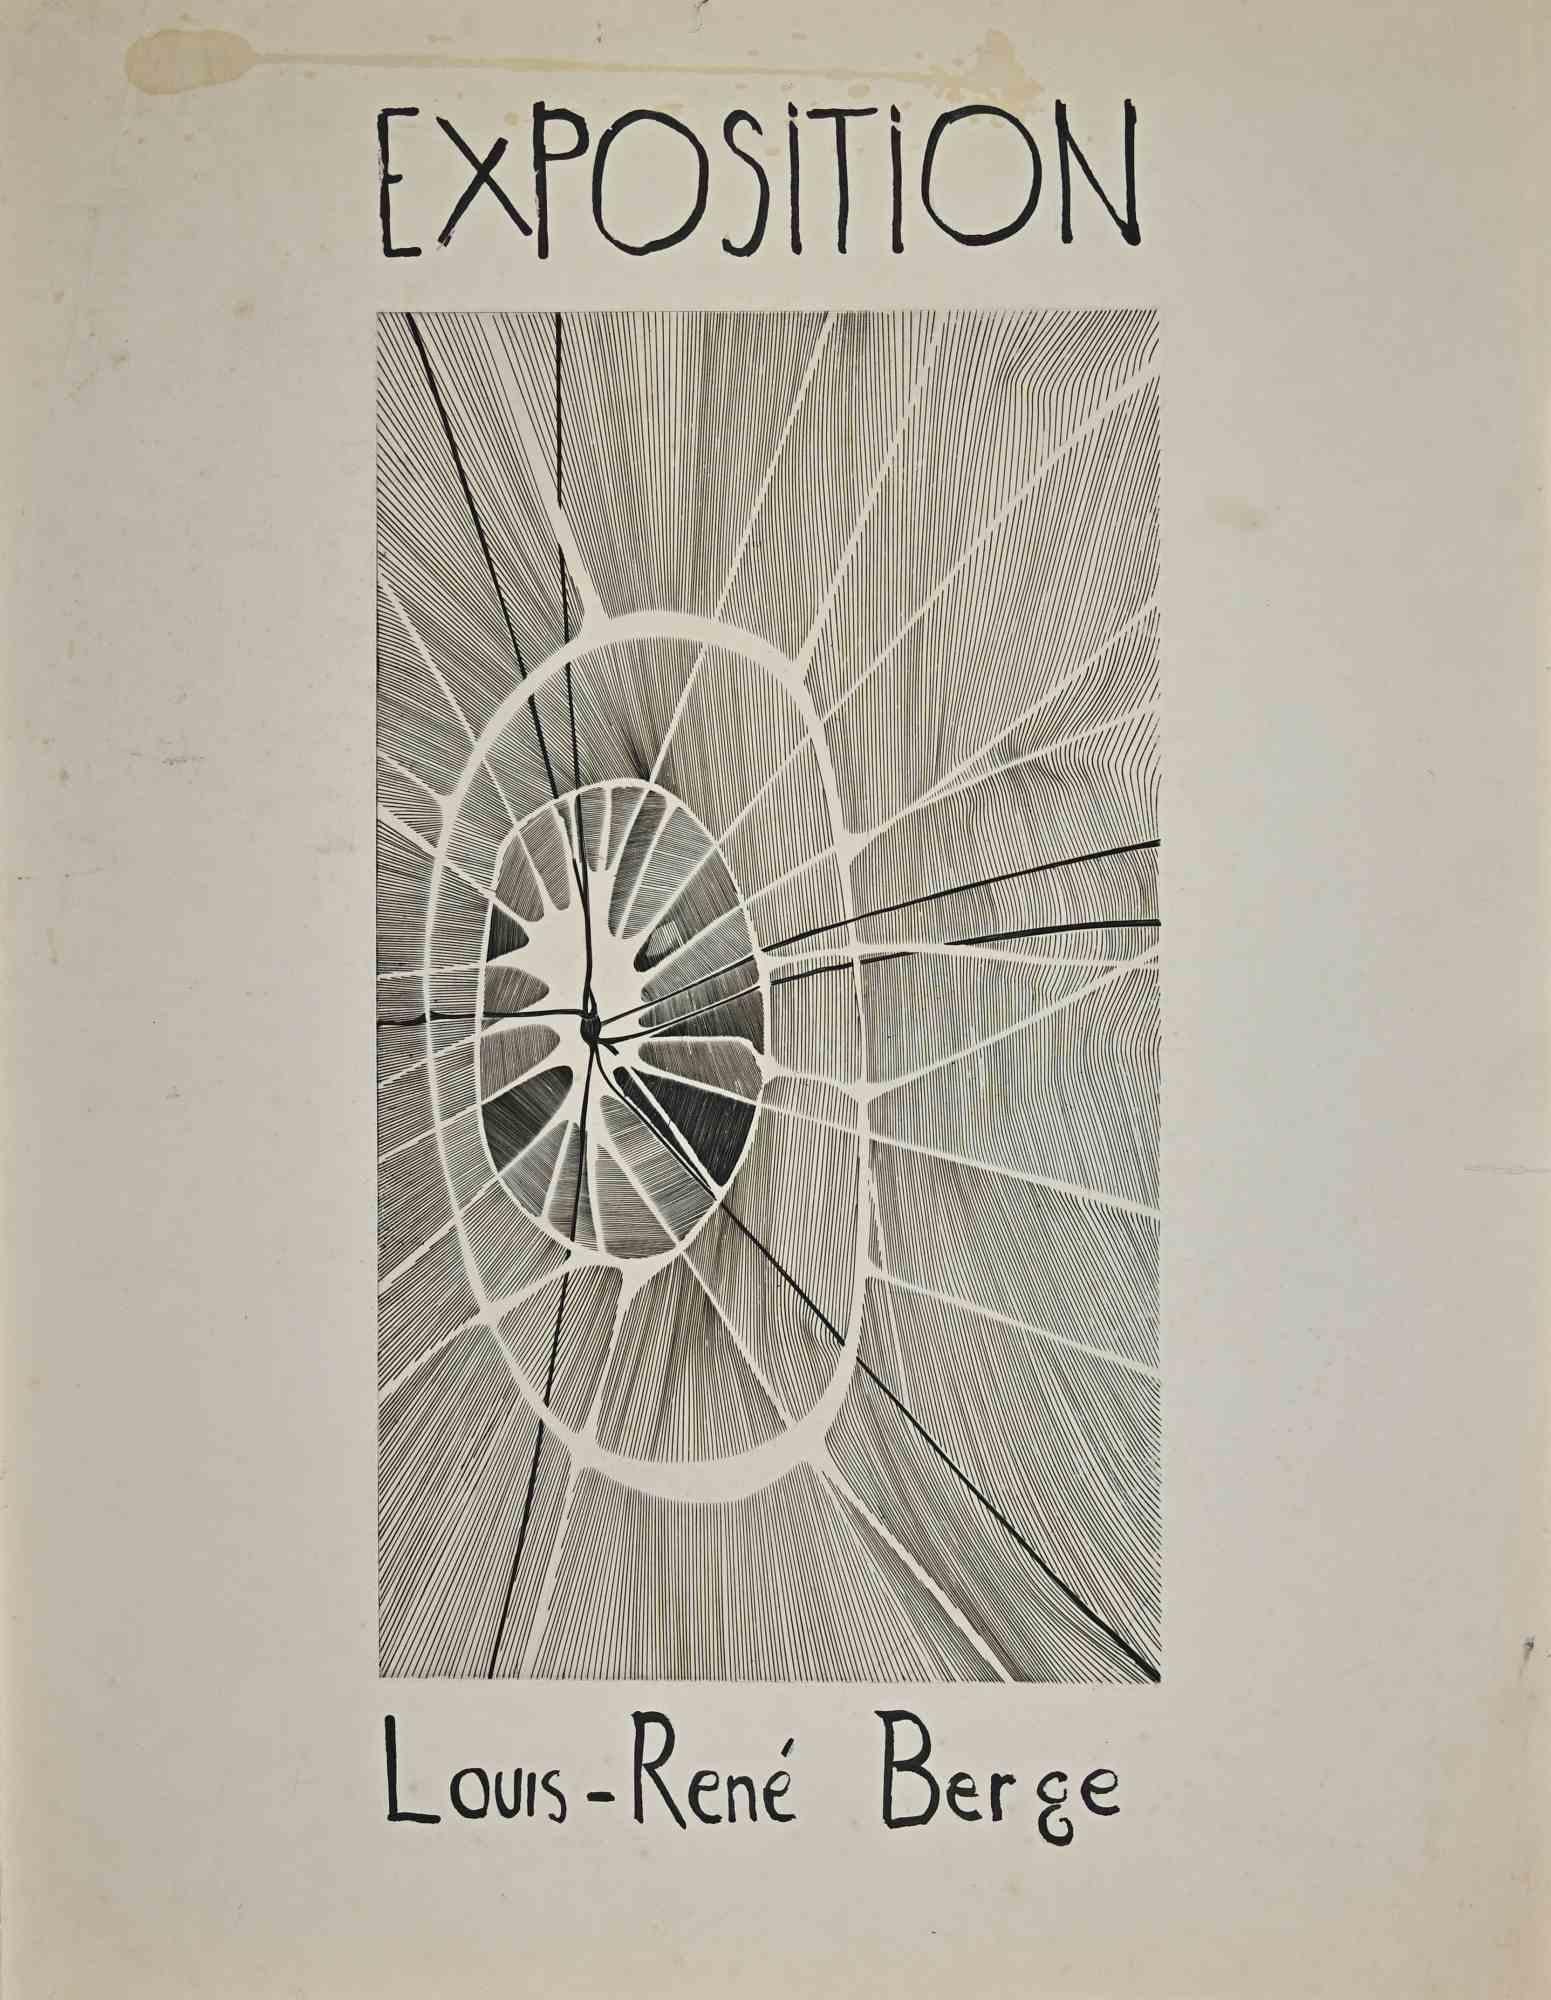 Louis-René Berge Abstract Print - Louis-Rene Berge Exhibition is a Vintage Poster - Mid-20th Century